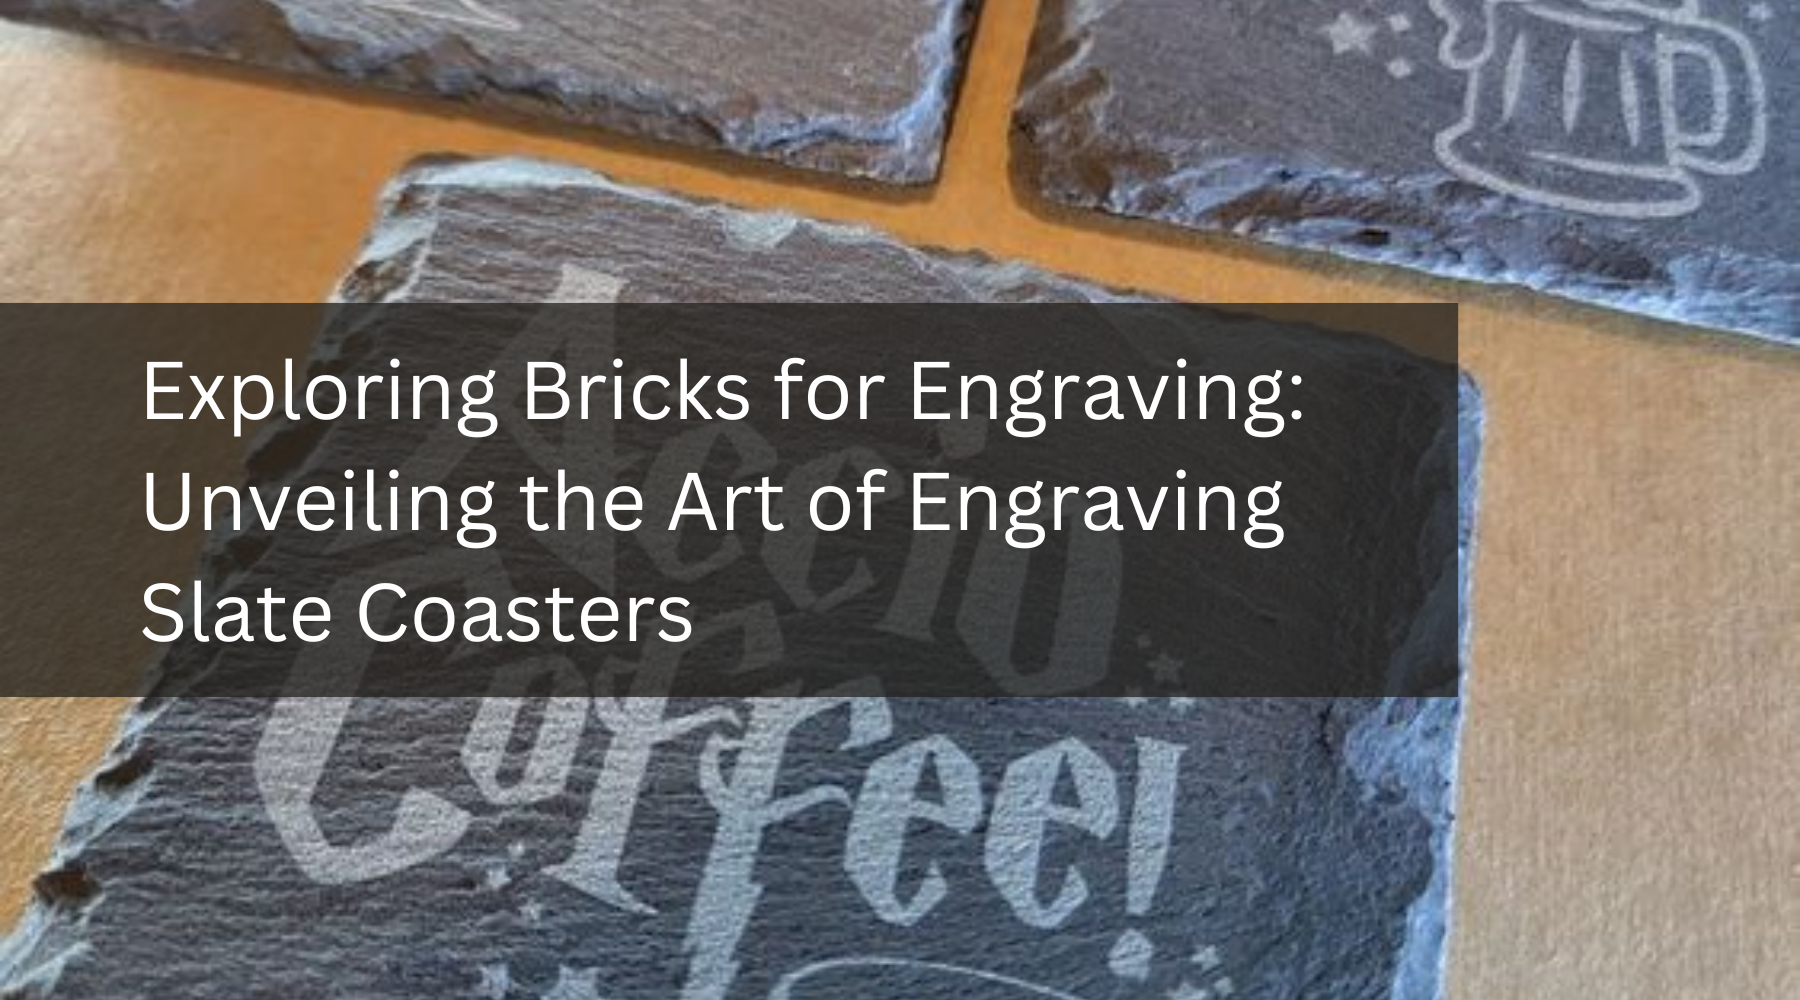 Exploring Bricks for Engraving: Unveiling the Art of Engraving Slate Coasters